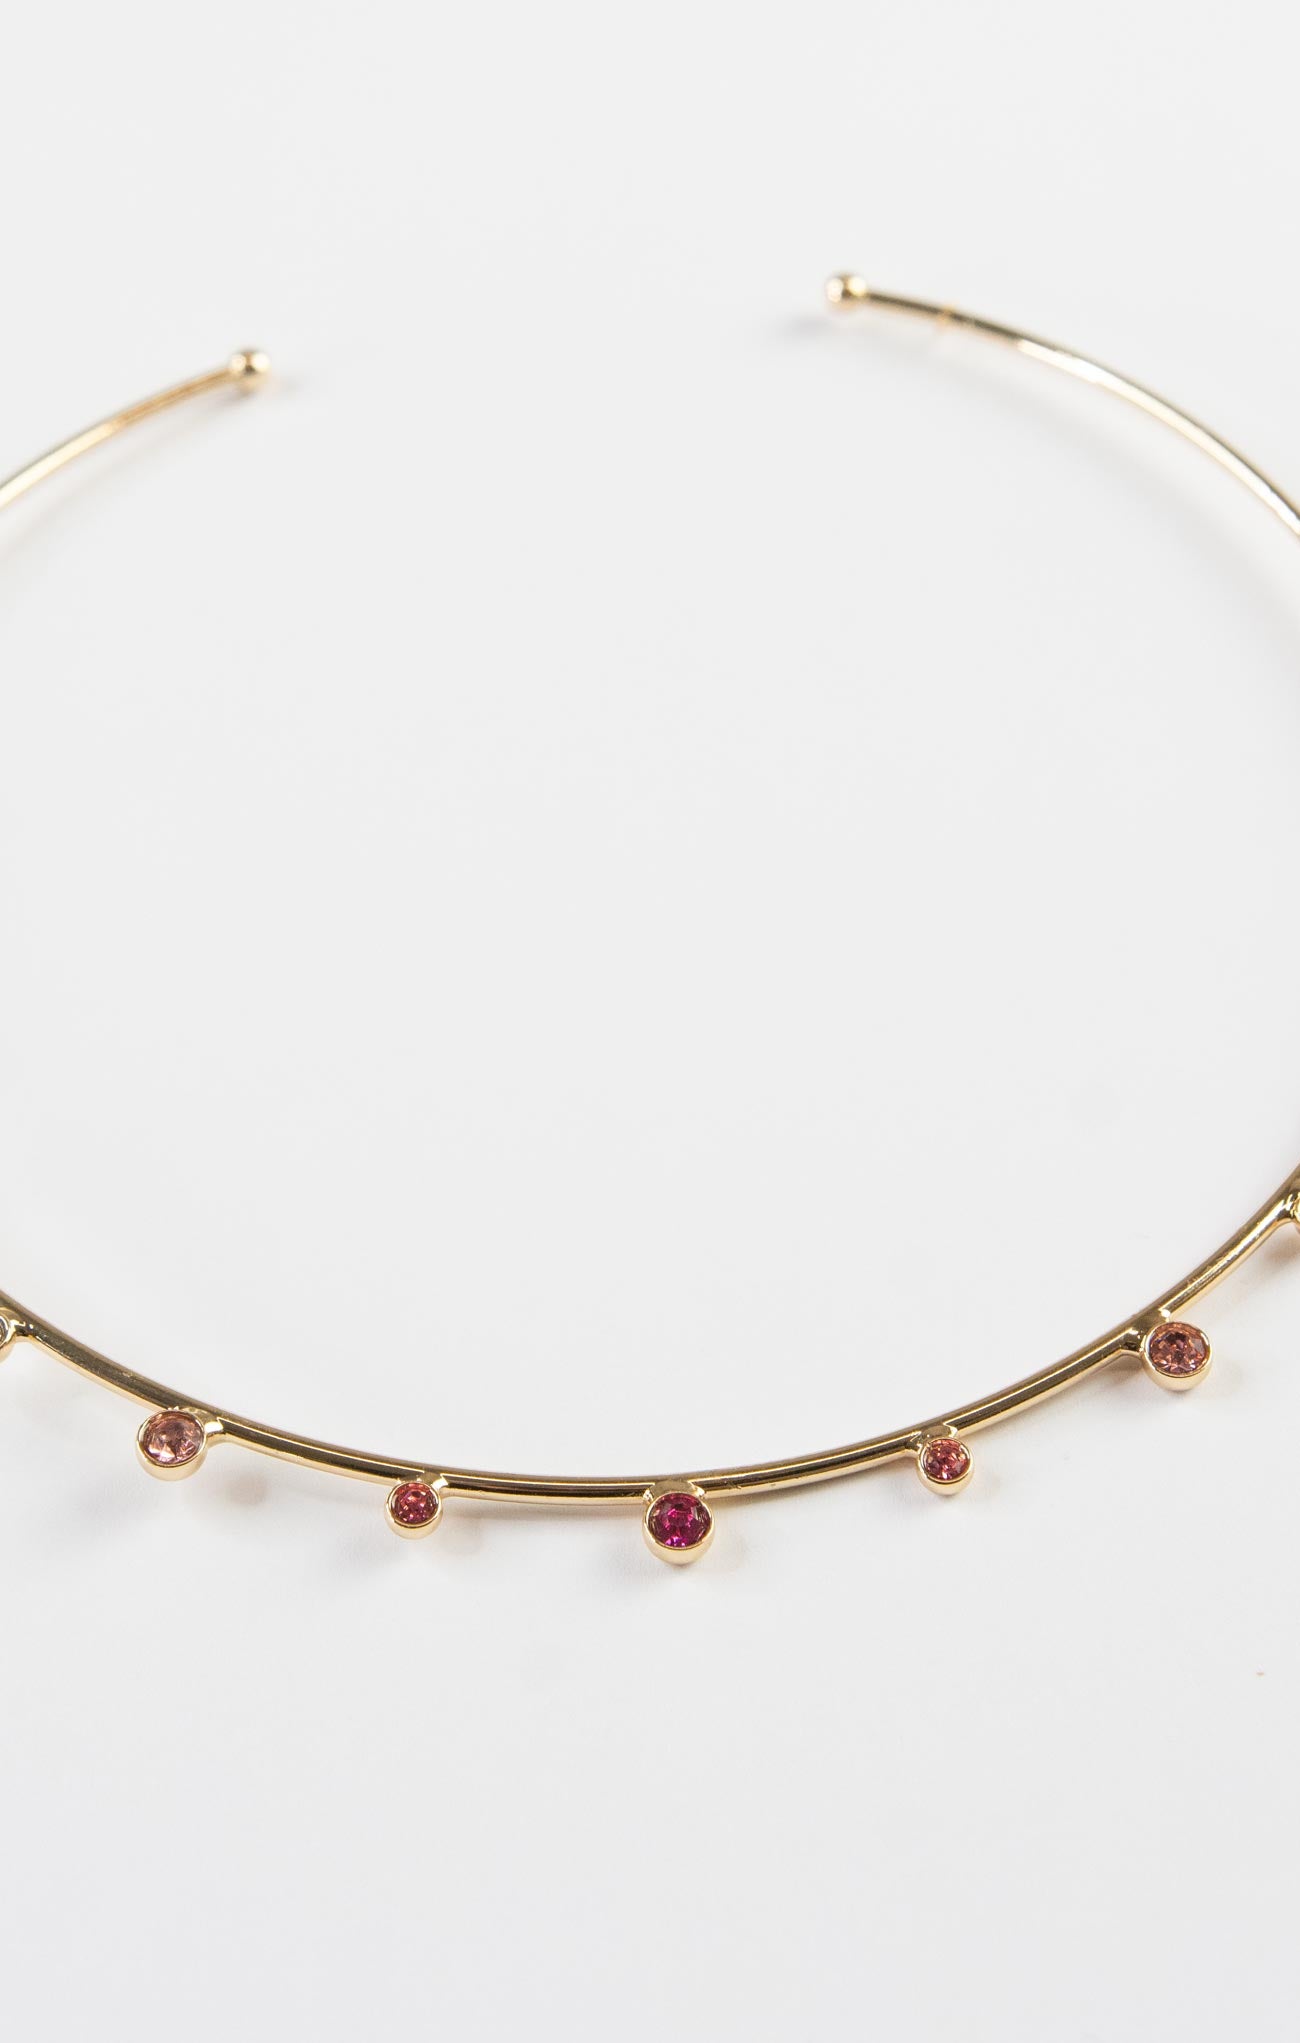 CRYSTAL BEADED CUFF NECKLACE-clear gold,pink gold,cuff neckalace,gold frame,colored stones